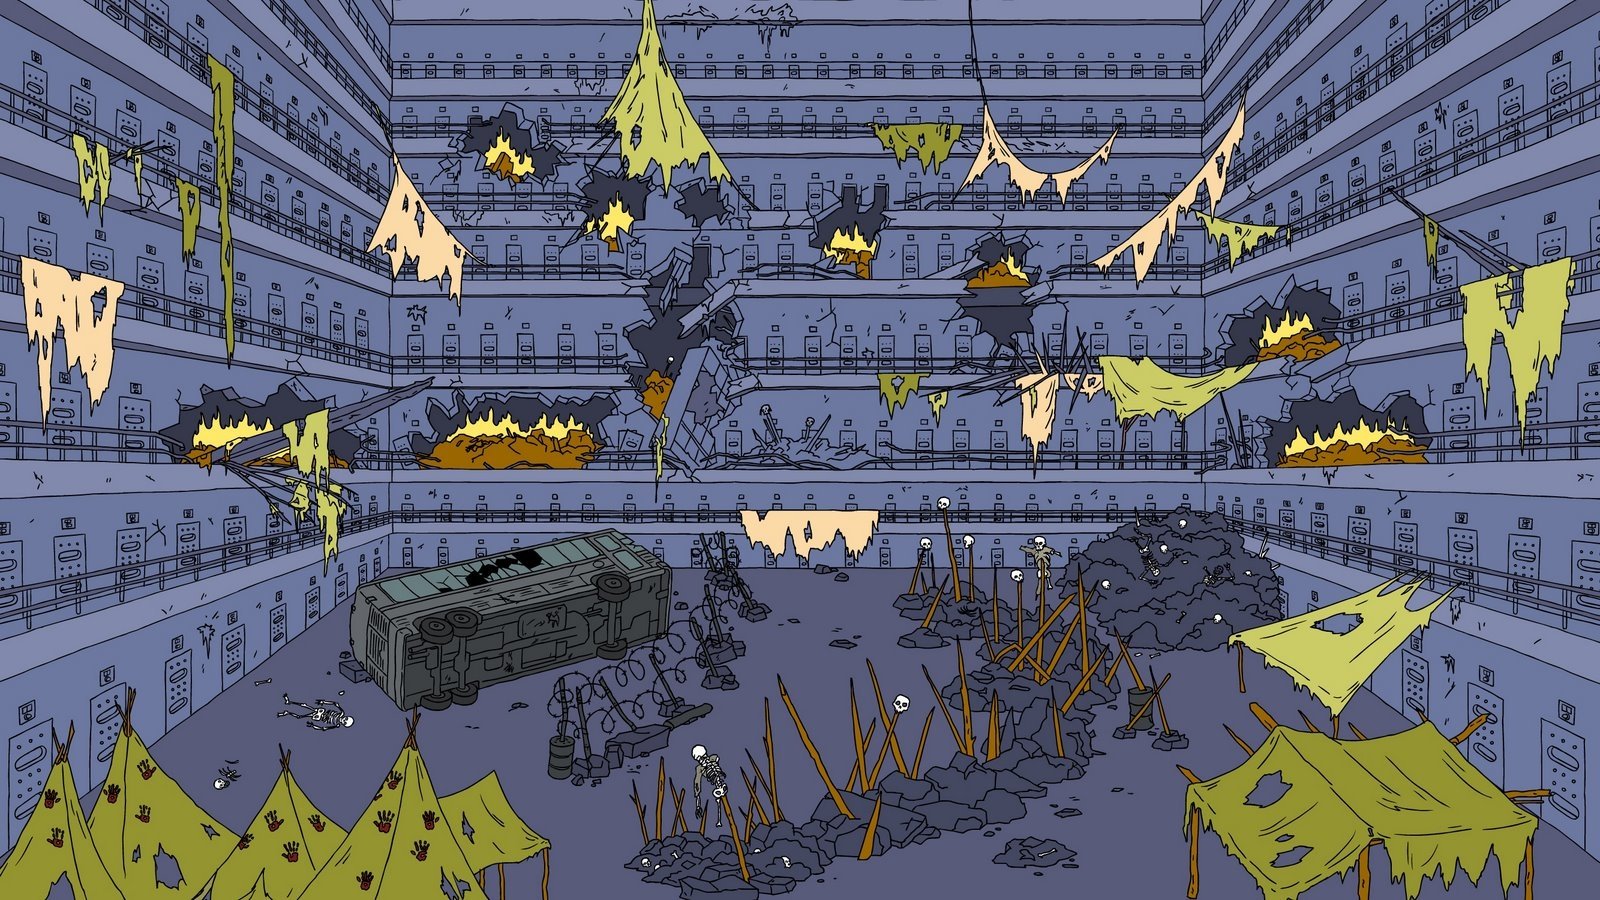 Superjail Wallpaper and Background Imagex900